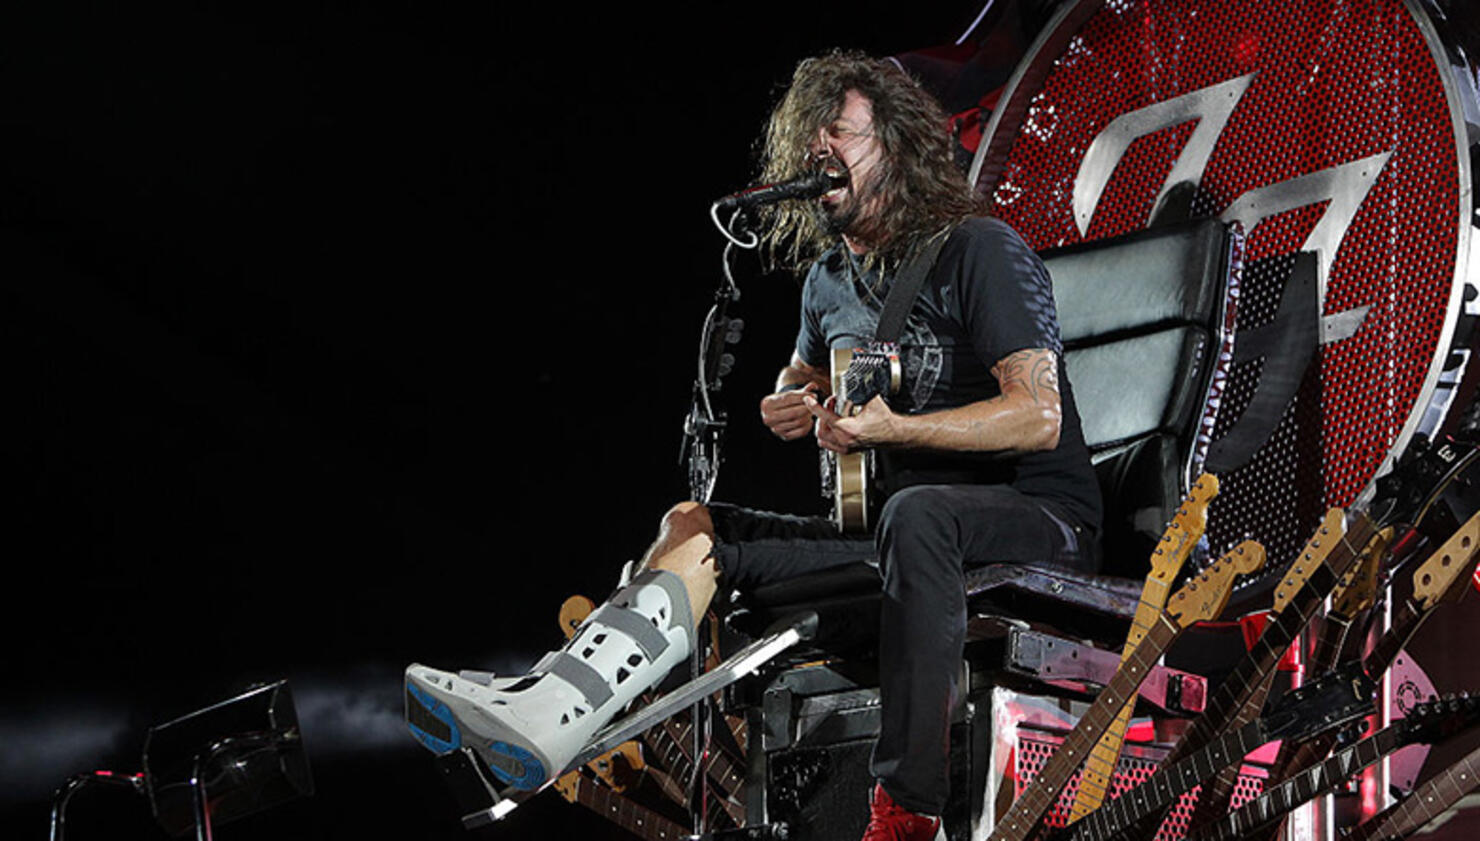 Watch Dave Grohl Prank Crowd With Stage Fall